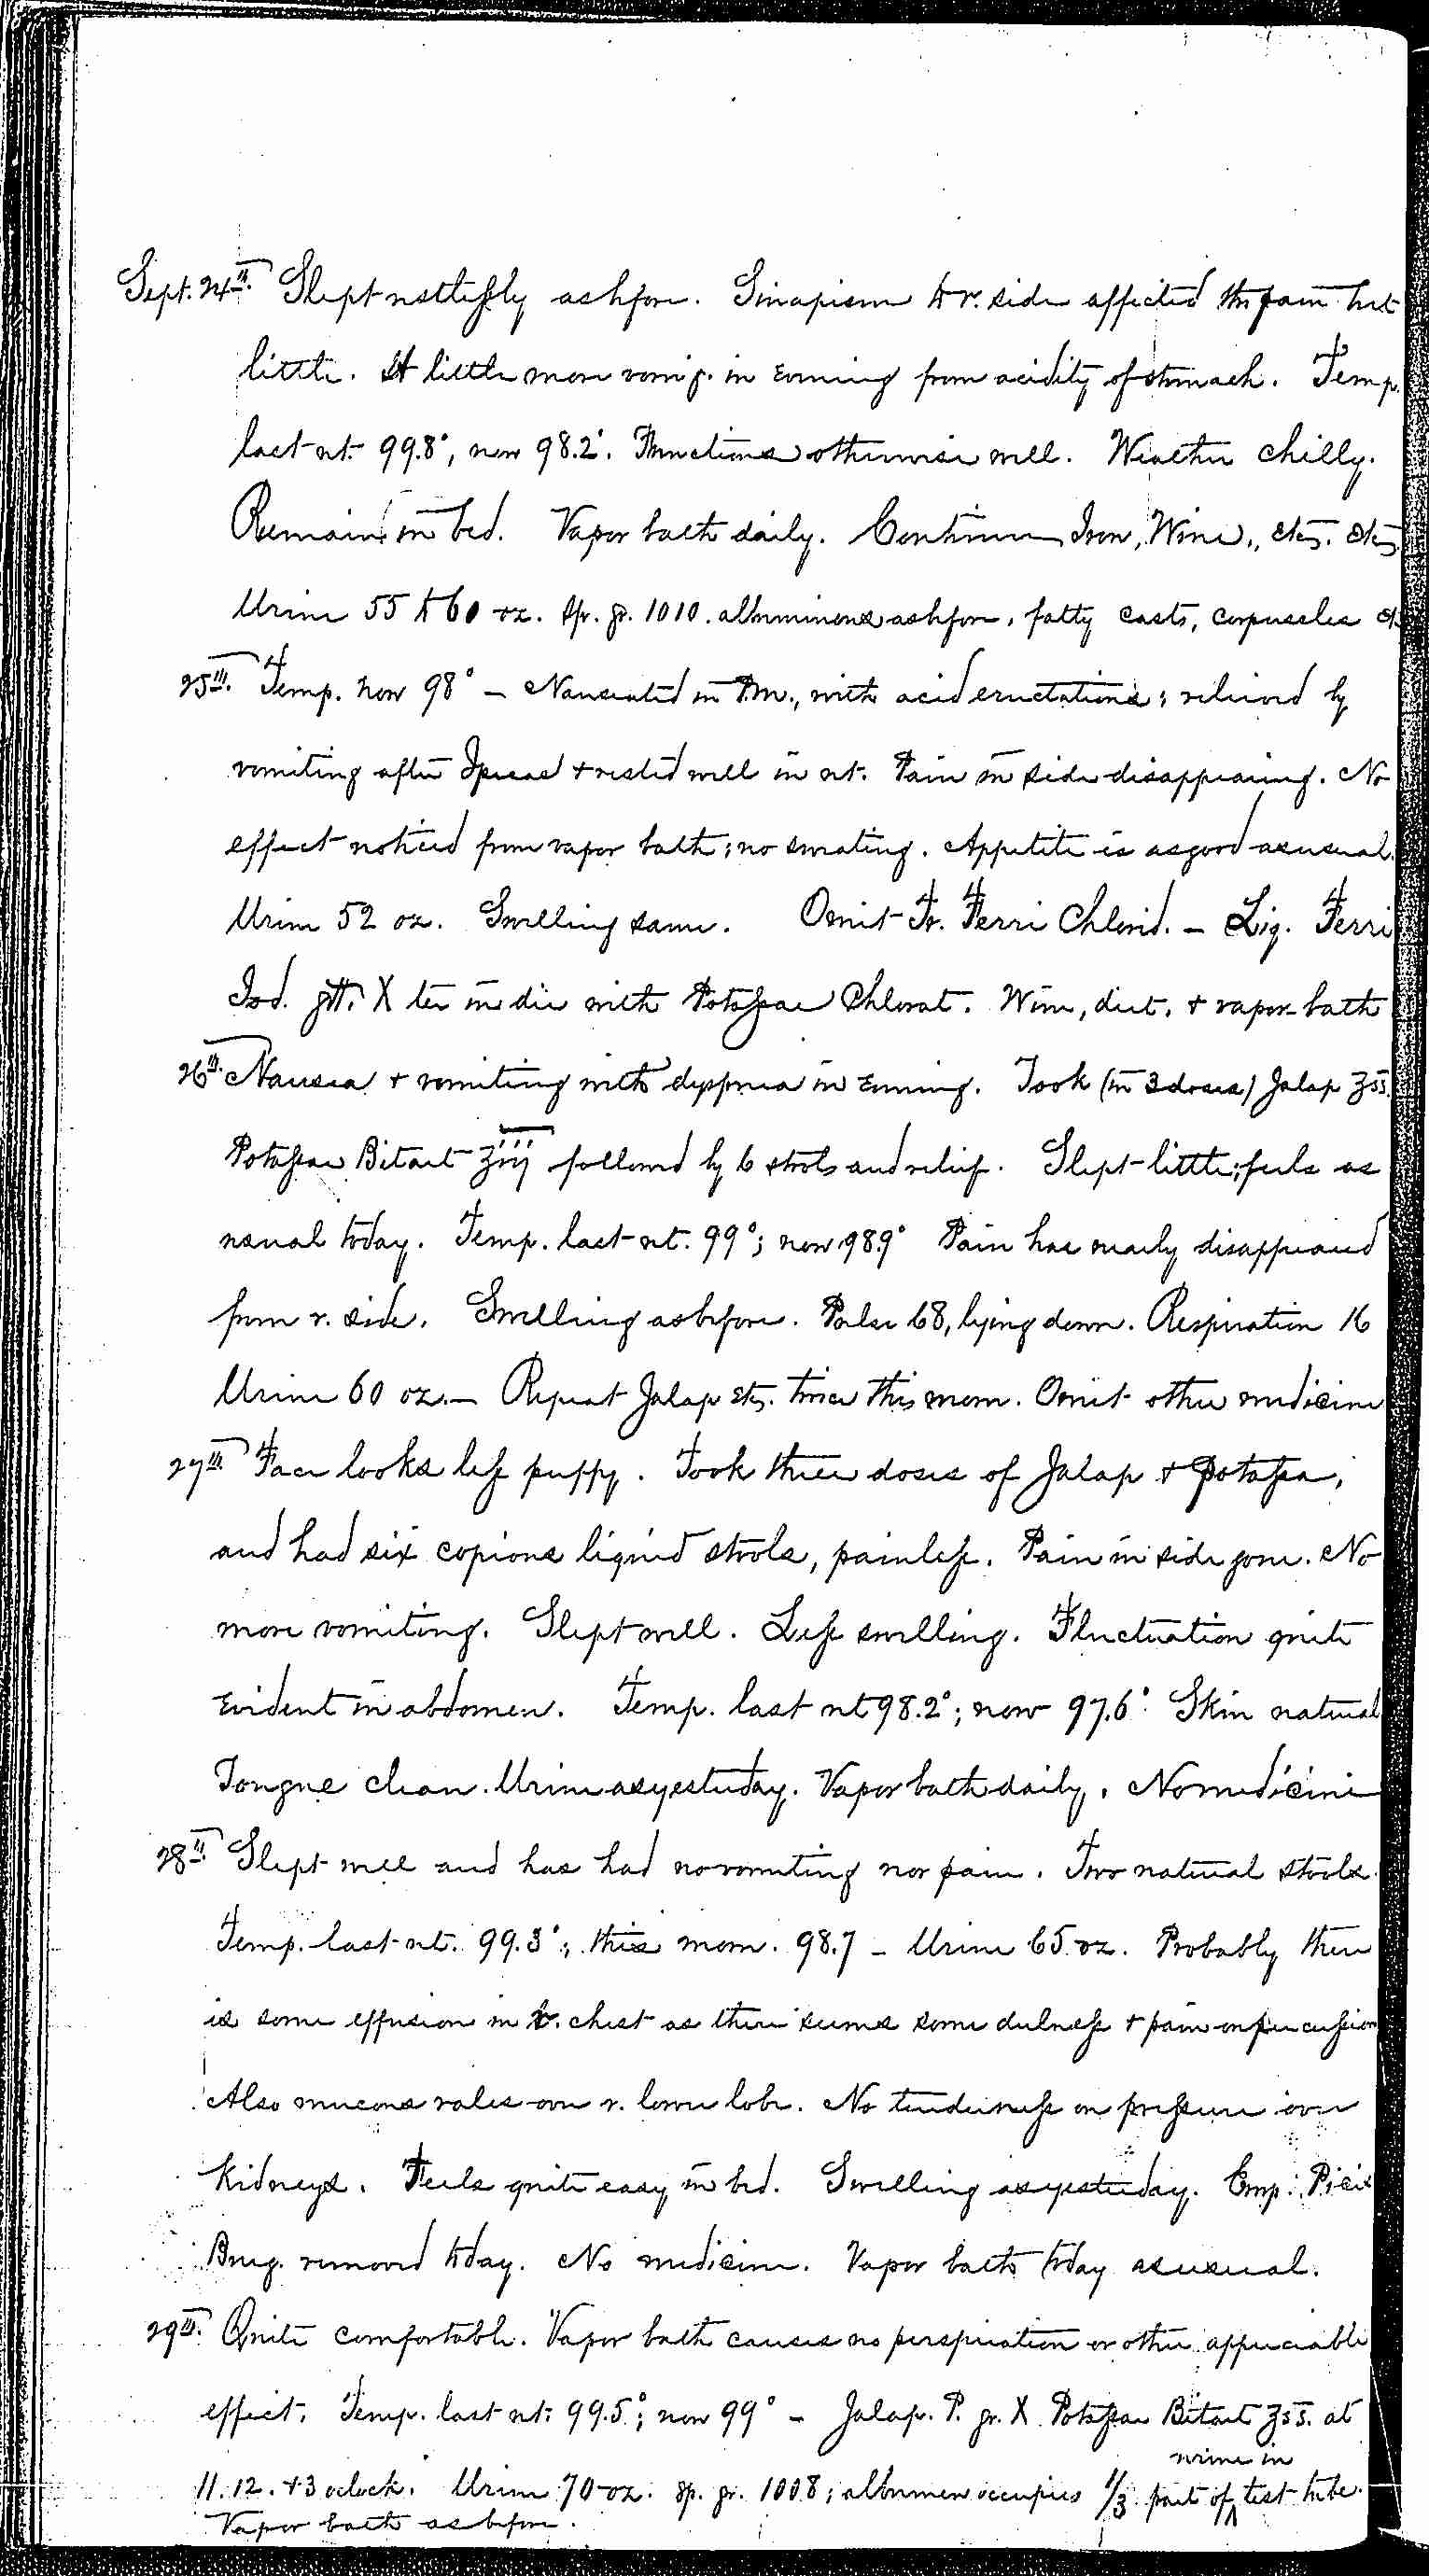 Entry for Bernard Coyne (page 4 of 13) in the log Hospital Tickets and Case Papers - Naval Hospital - Washington, D.C. - 1868-69